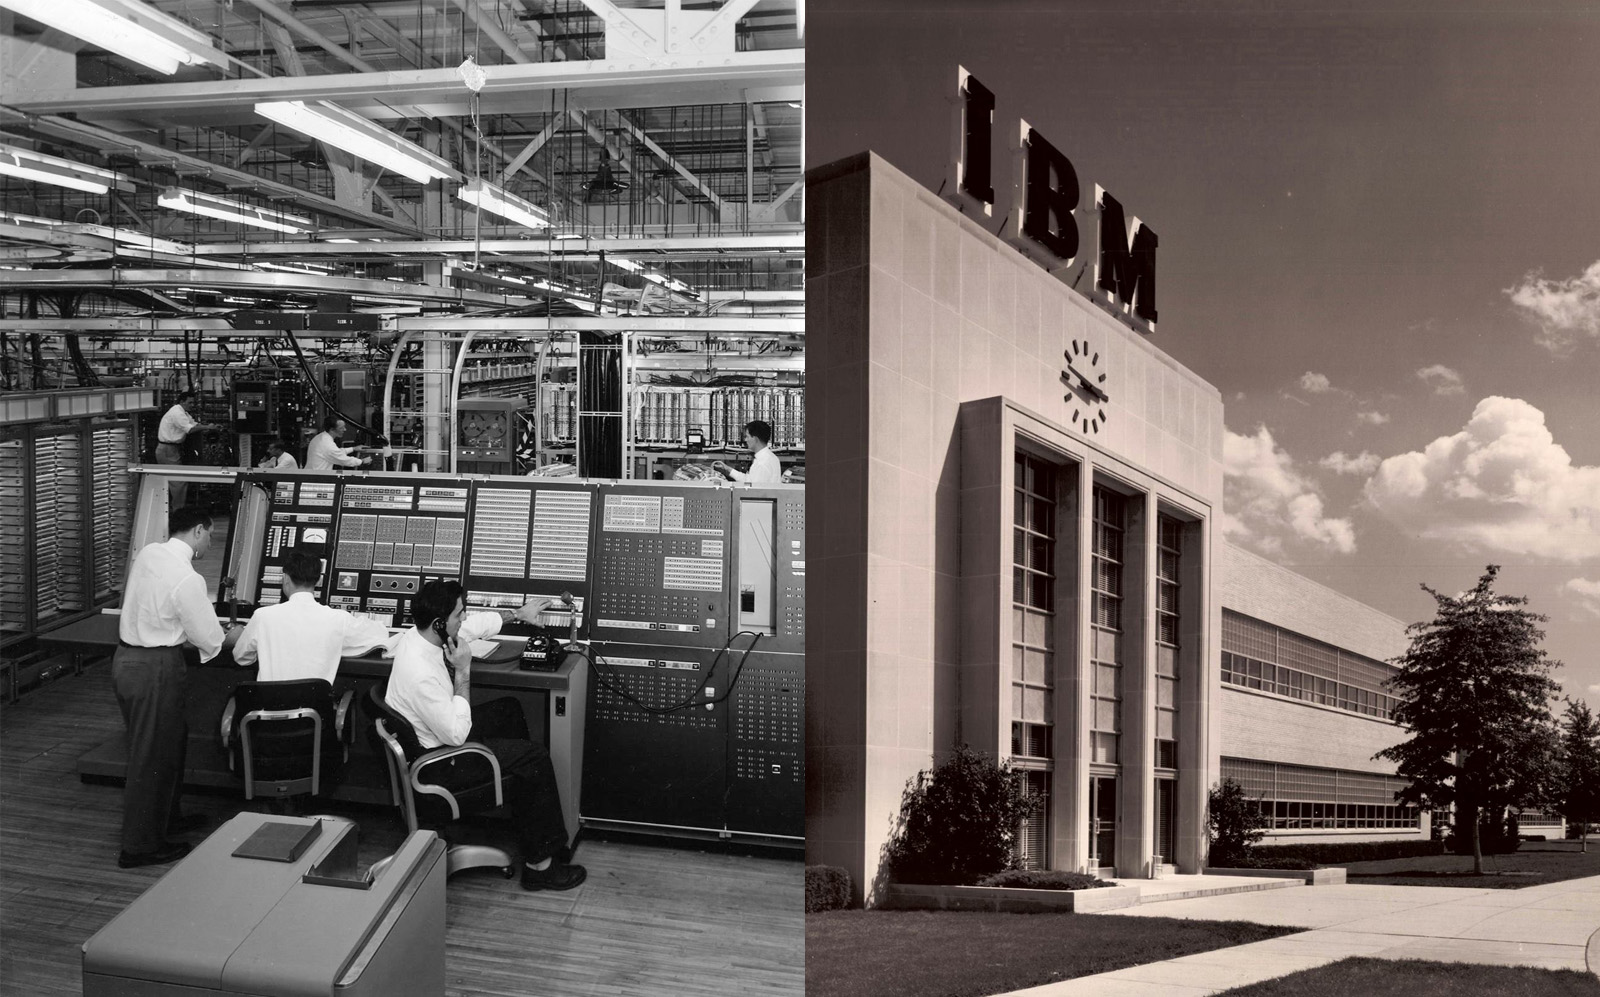 images from the old IBM campus (Kingston — The IBM Years via Facebook.)